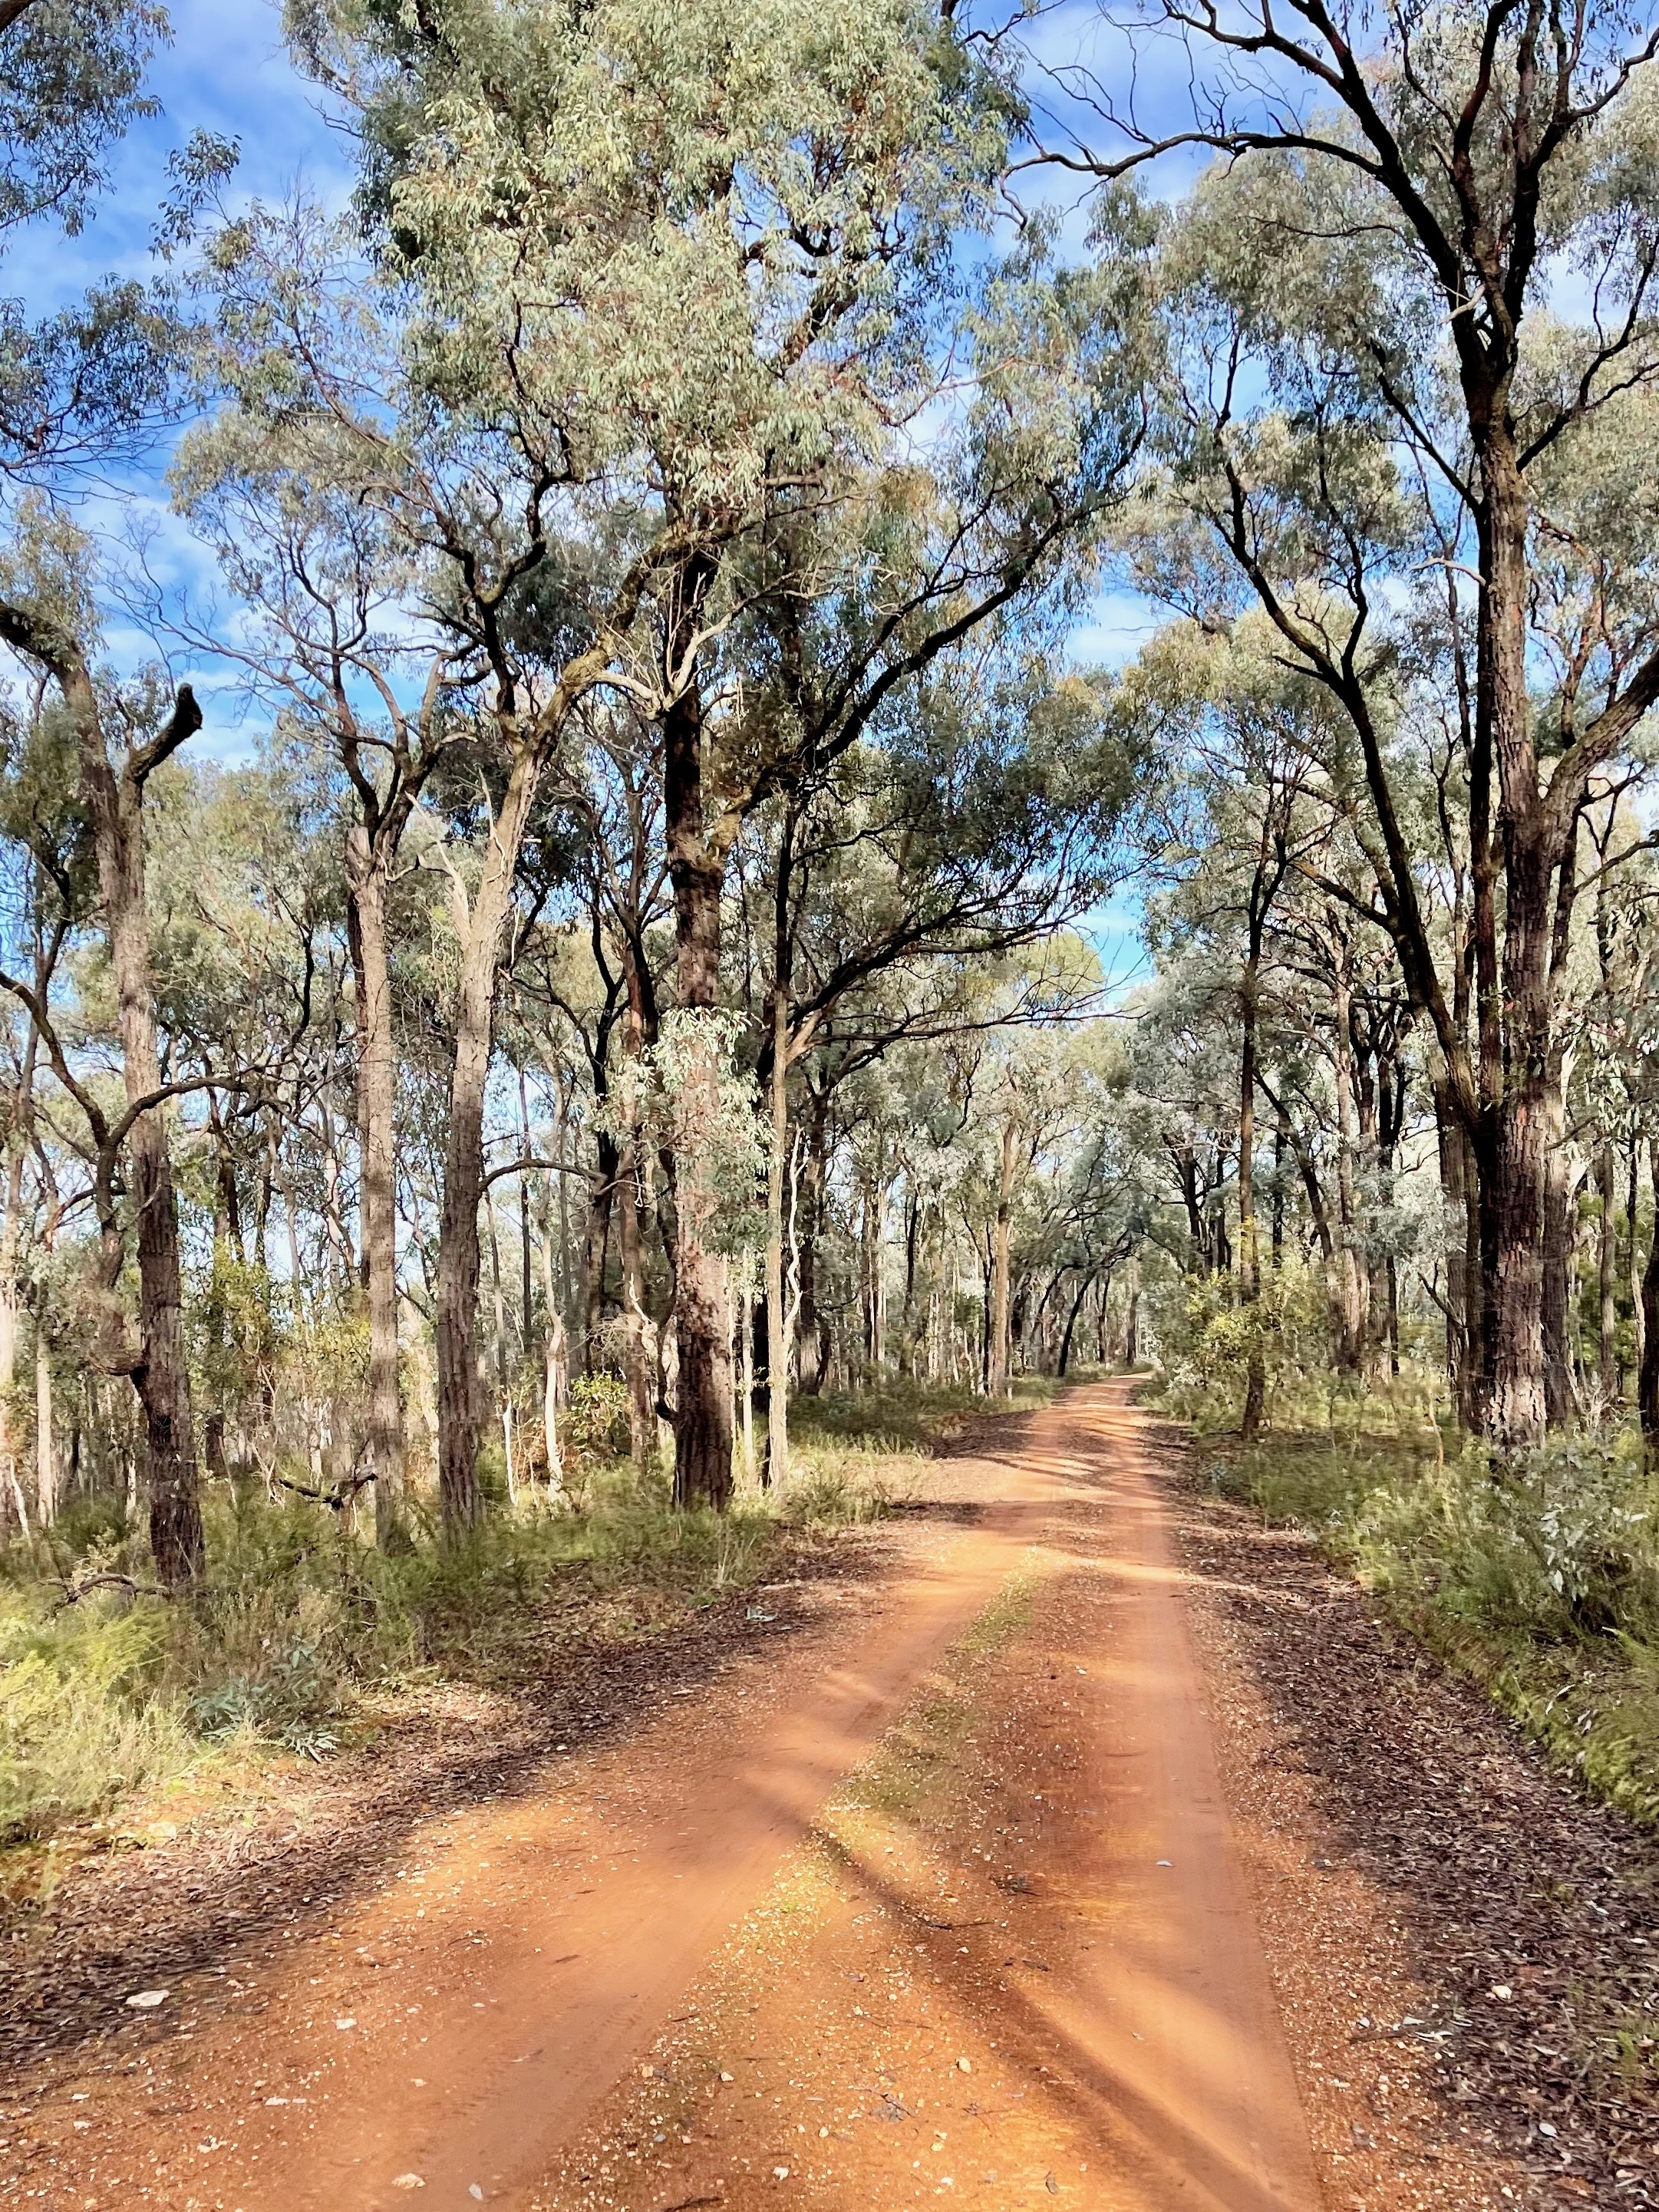 A native tree lined smooth red dirt road winding through native bush on a sunny day with shadows cast across the road